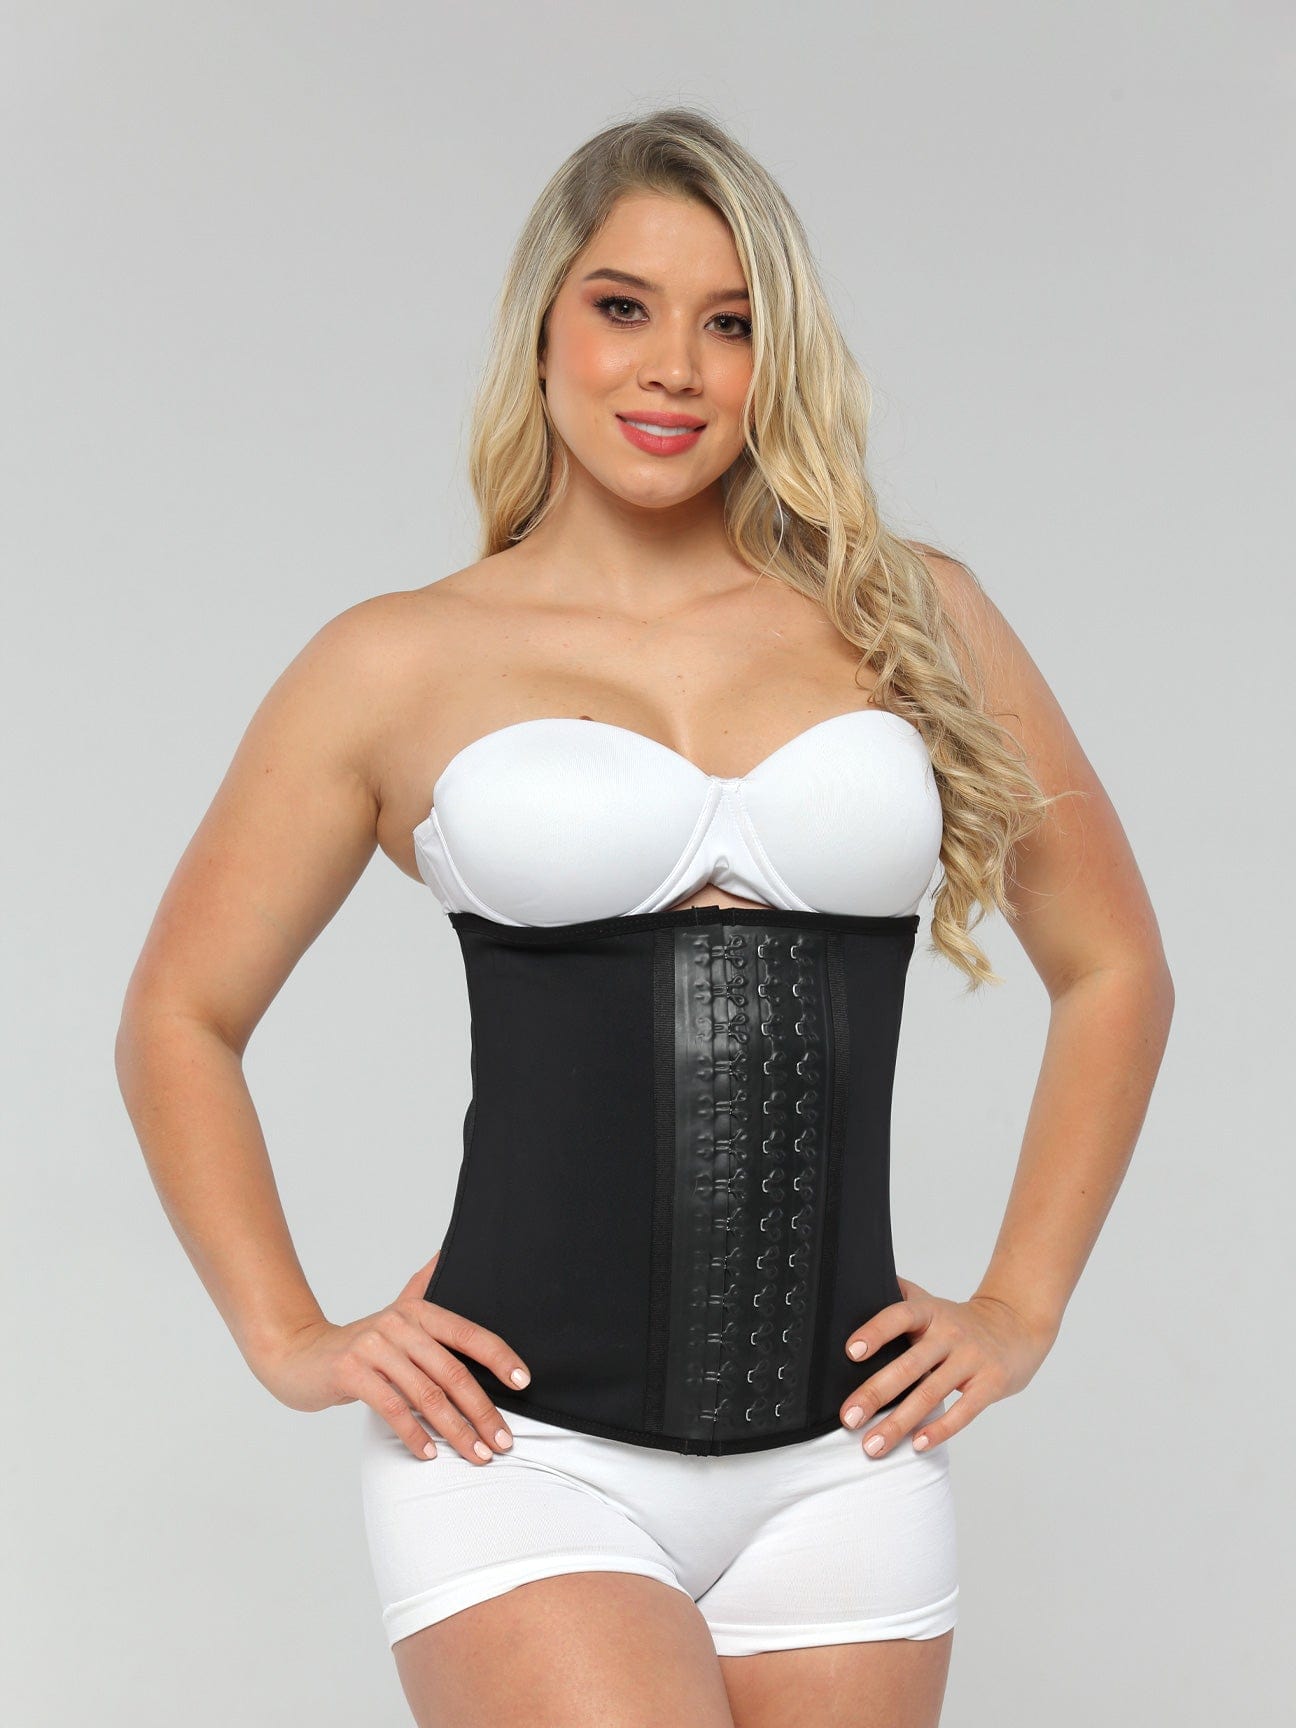  Fajate CINTURILLAS Colombianas Latex Waist  Cincher/Trainer/Trimmer/Corset Weight Loss Shaper. (Black, 3XLARGE) :  Clothing, Shoes & Jewelry